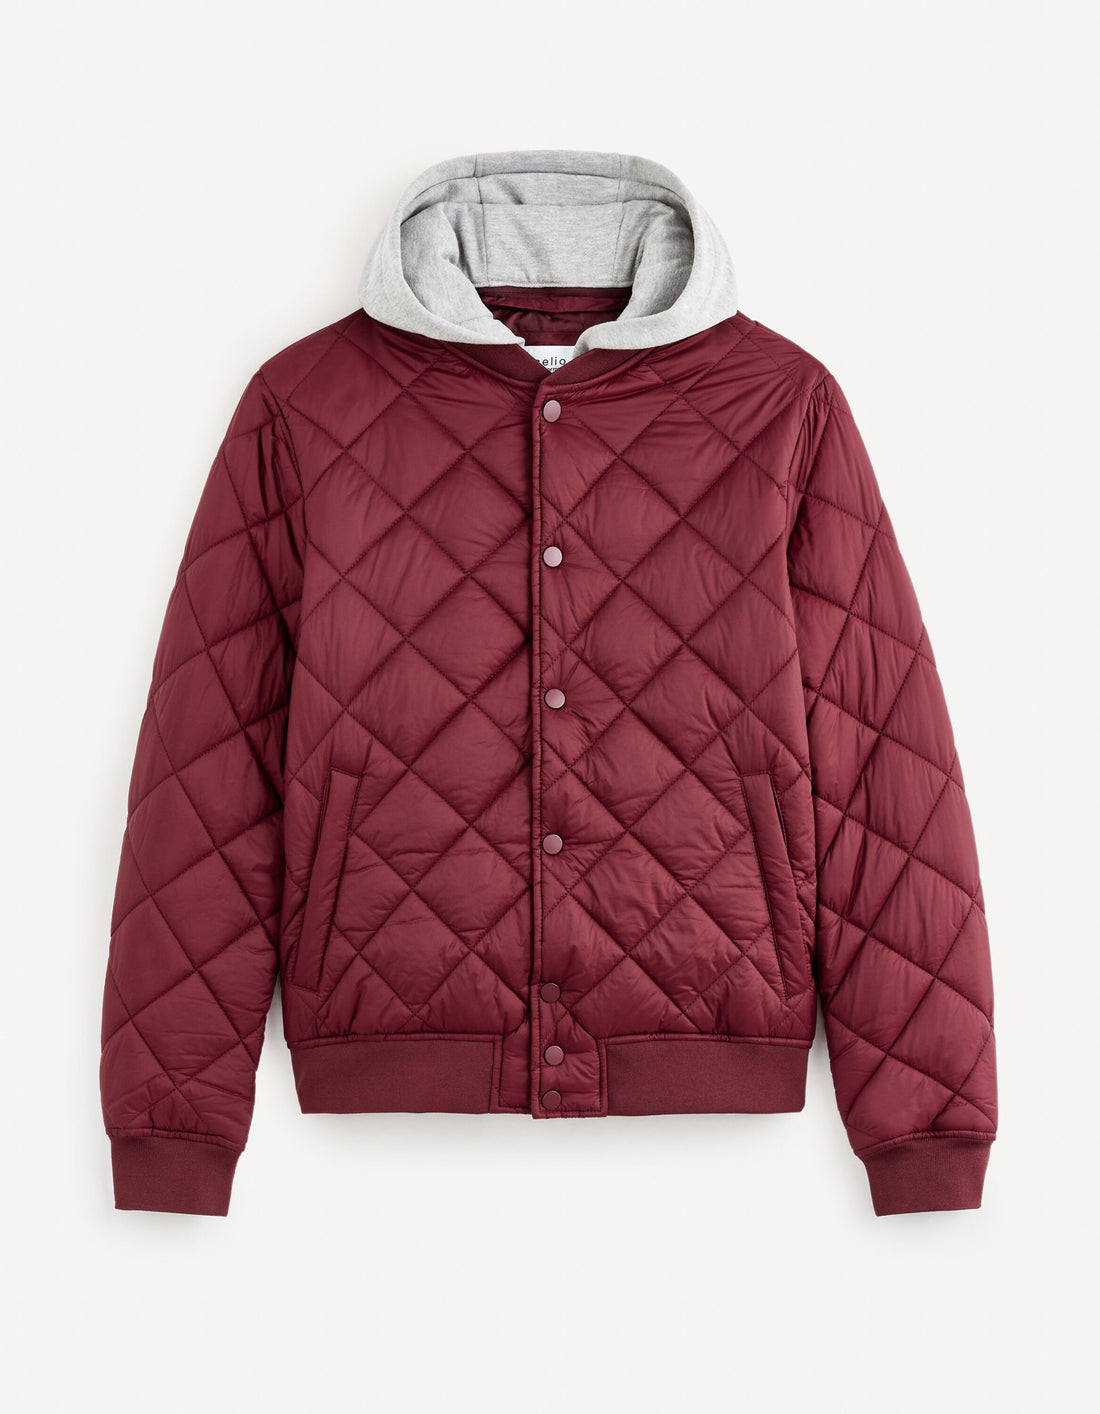 Hooded Bomber Jacket_FUQUILTED_BURGUNDY_02